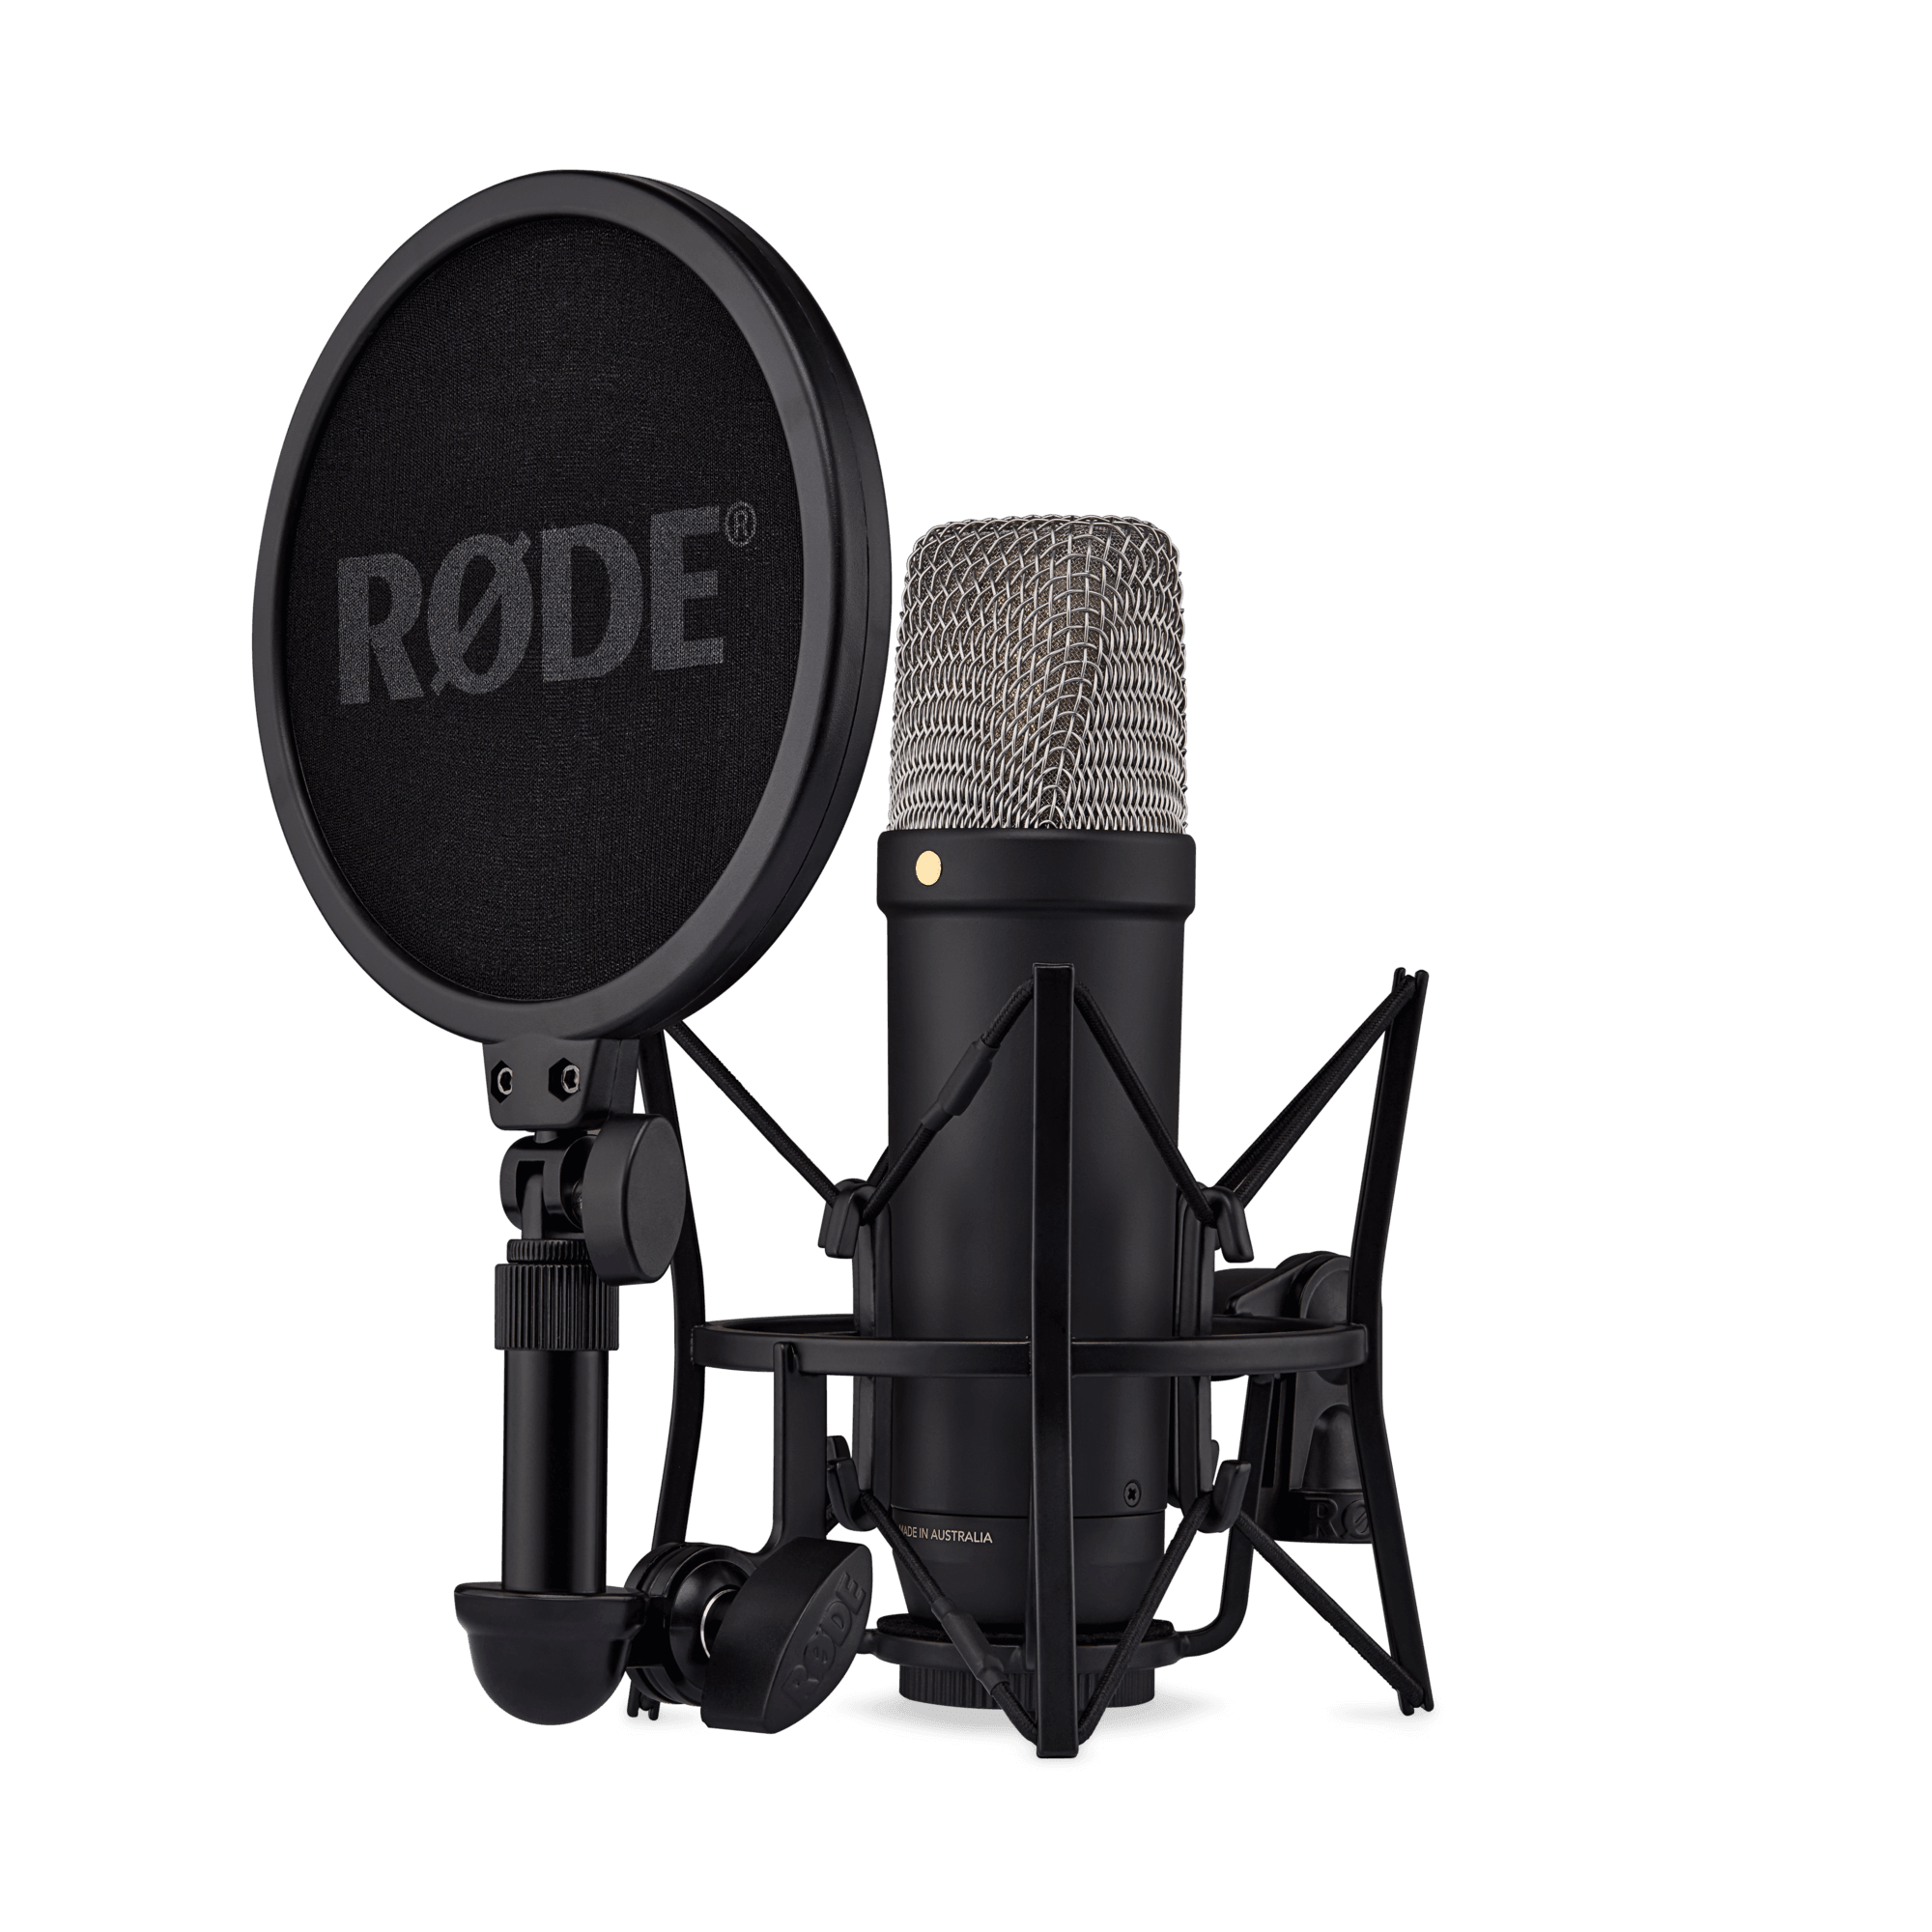 NT1 5th Generation Large-Diaphragm Cardioid Condenser XLR/USB Microphone - Live & Recording by RODE at Muso's Stuff